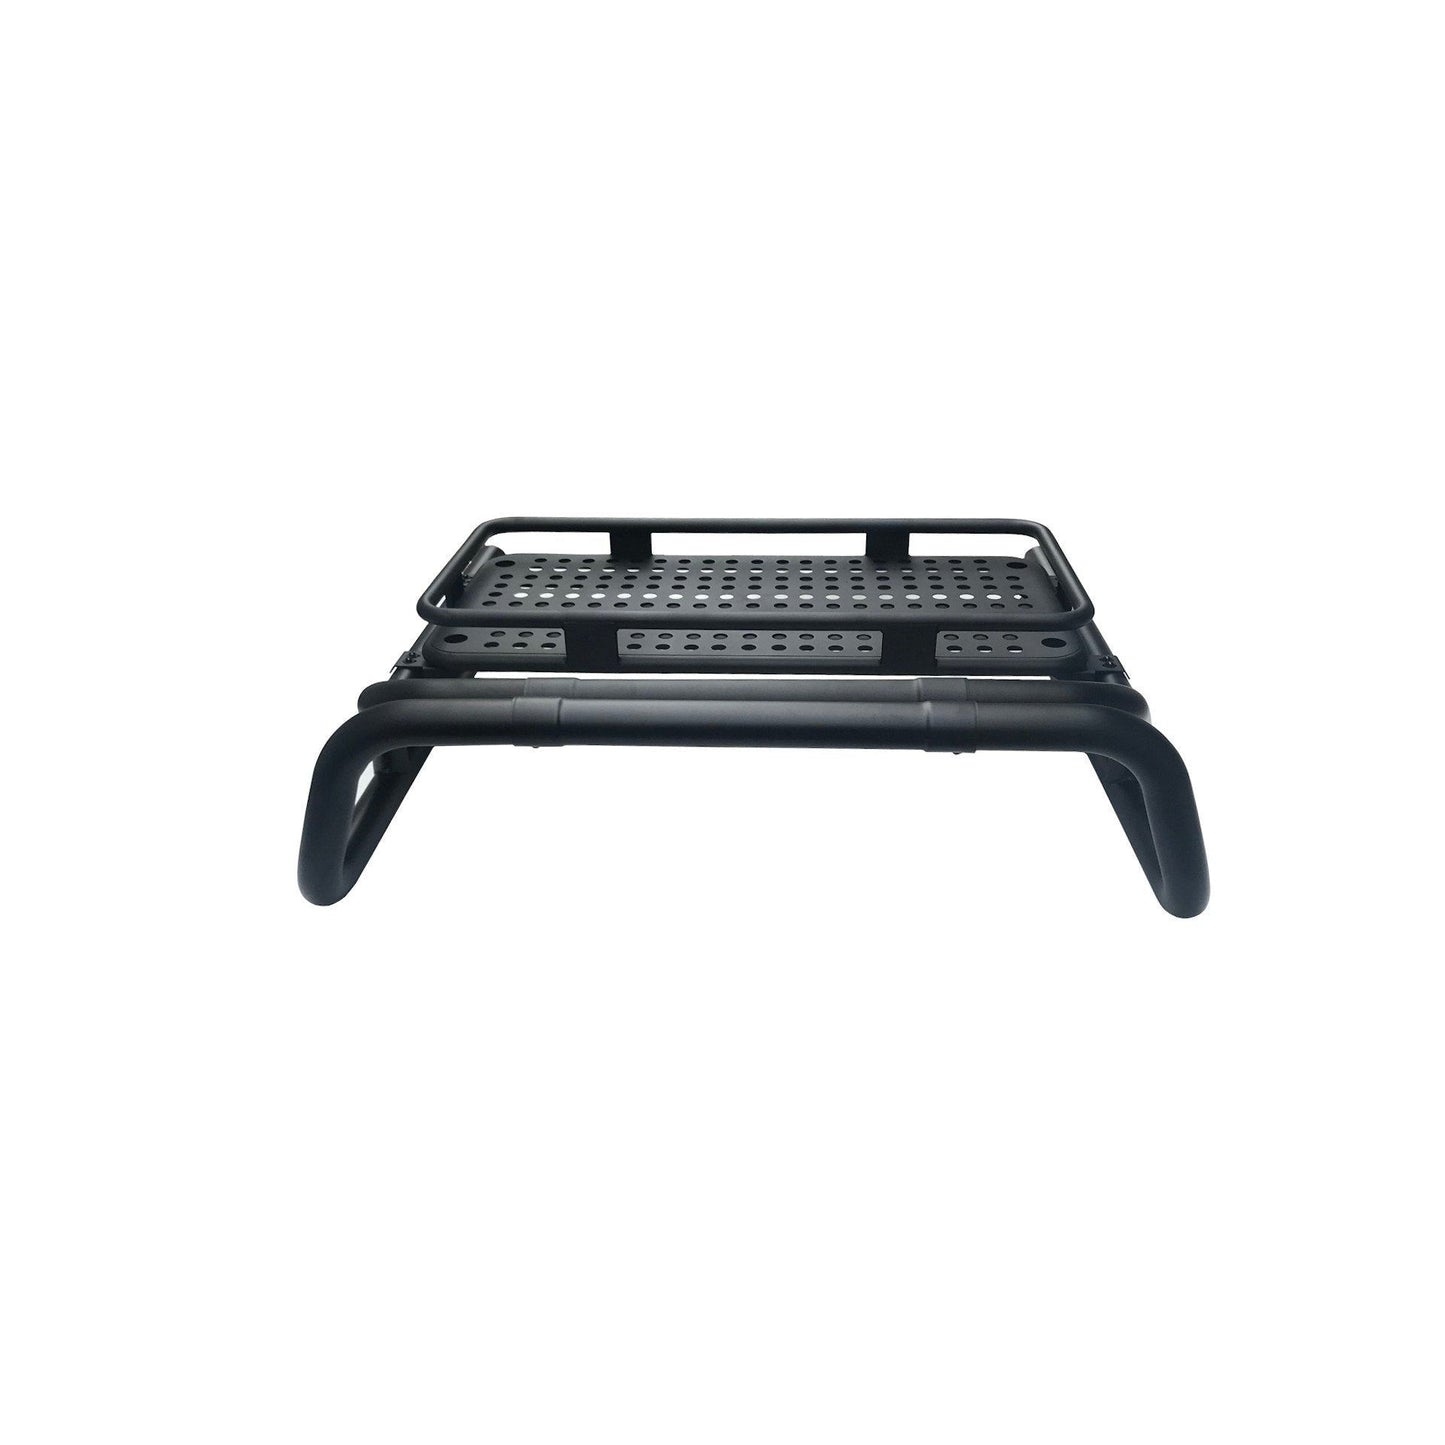 Black SUS201 Long Arm Roll Bar with Cargo Basket Rack for Ford Ranger 2006-2012